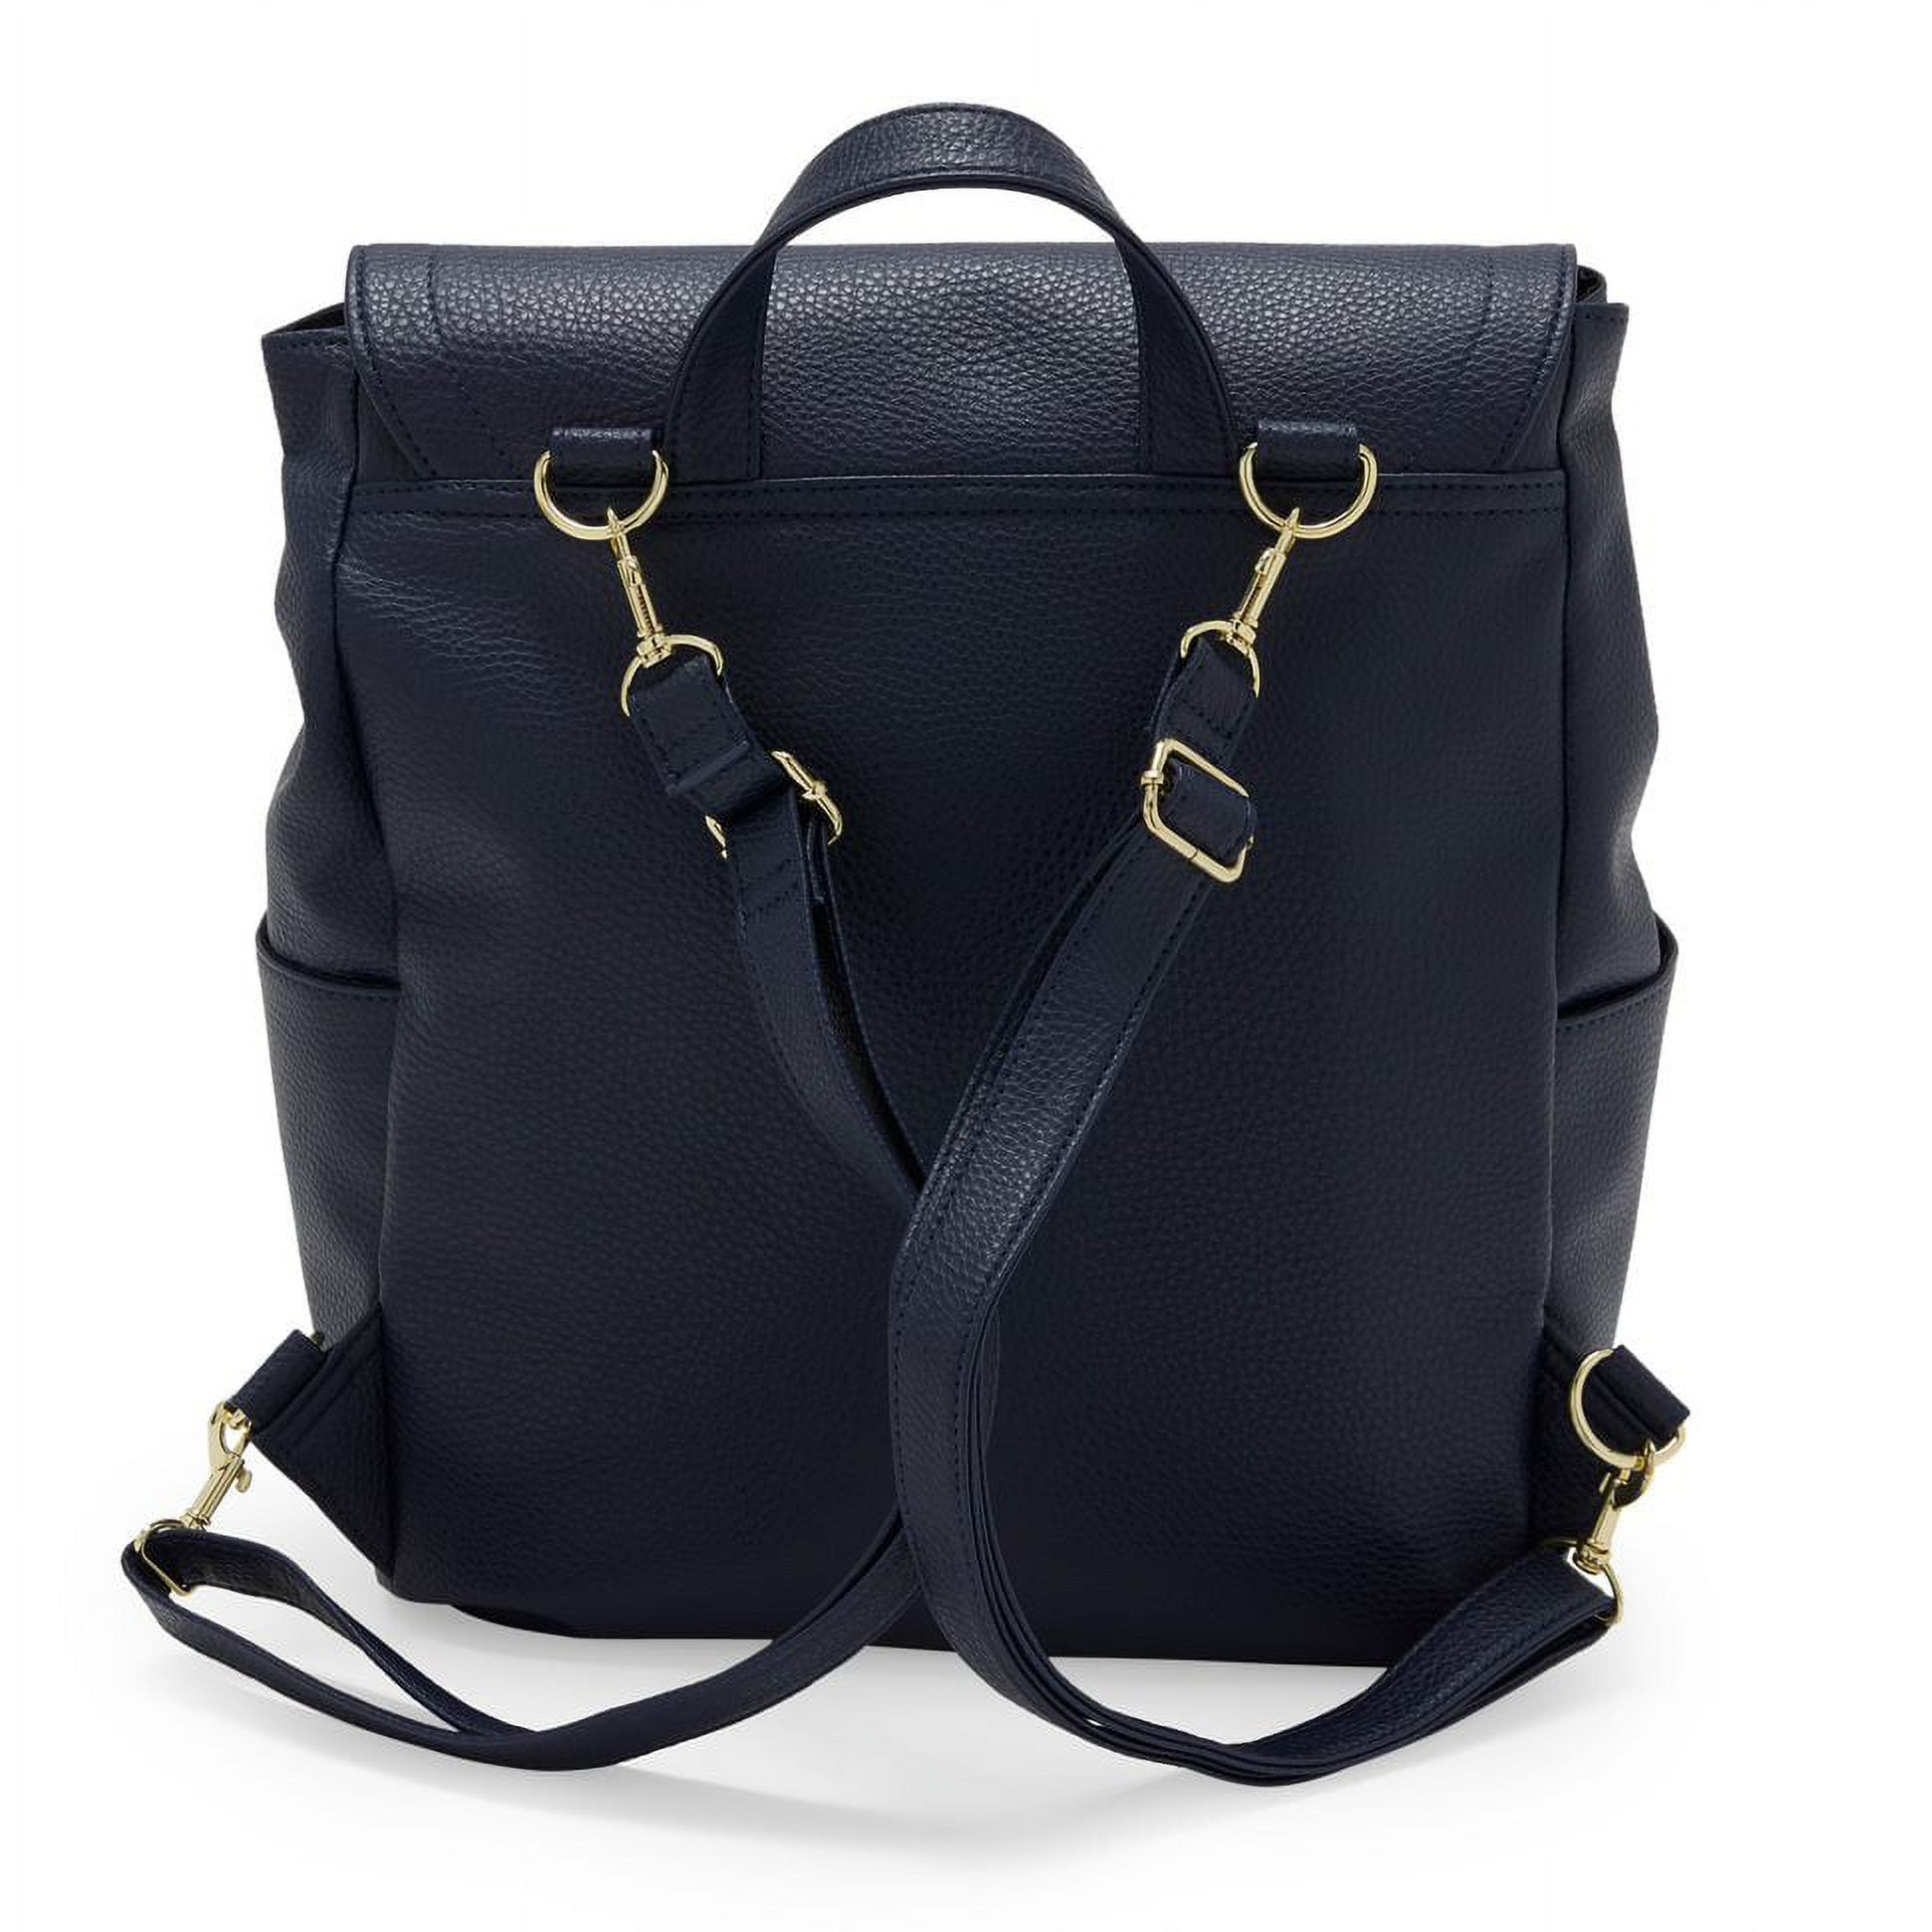 MoDRN Charli Diaper Bag in Navy, Convertible Backpack with Adjustable Straps - image 2 of 6